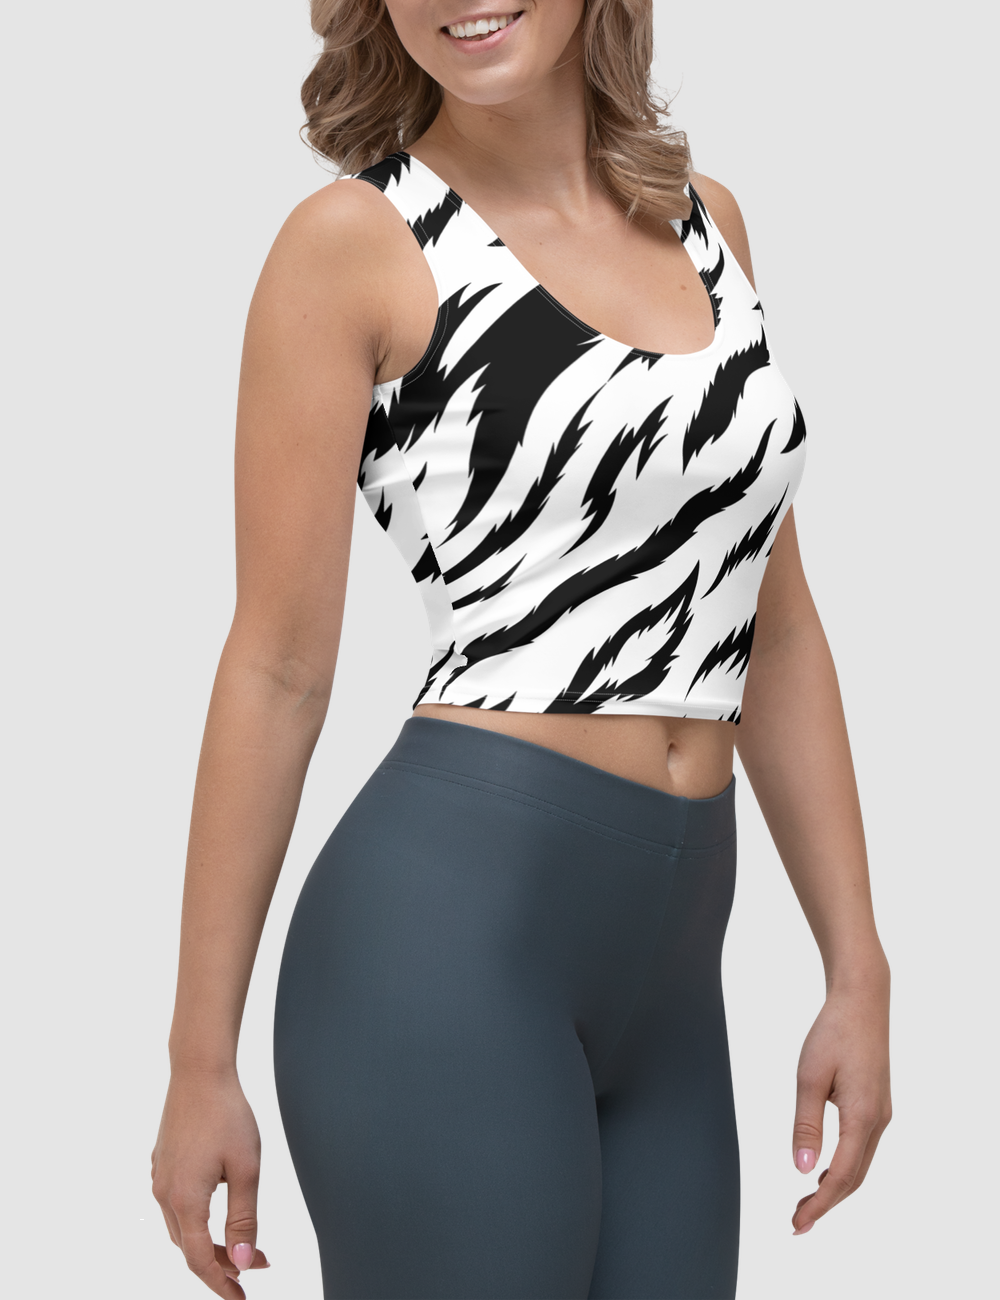 Snow Tiger | Women's Sleeveless Fitted Crop Top OniTakai